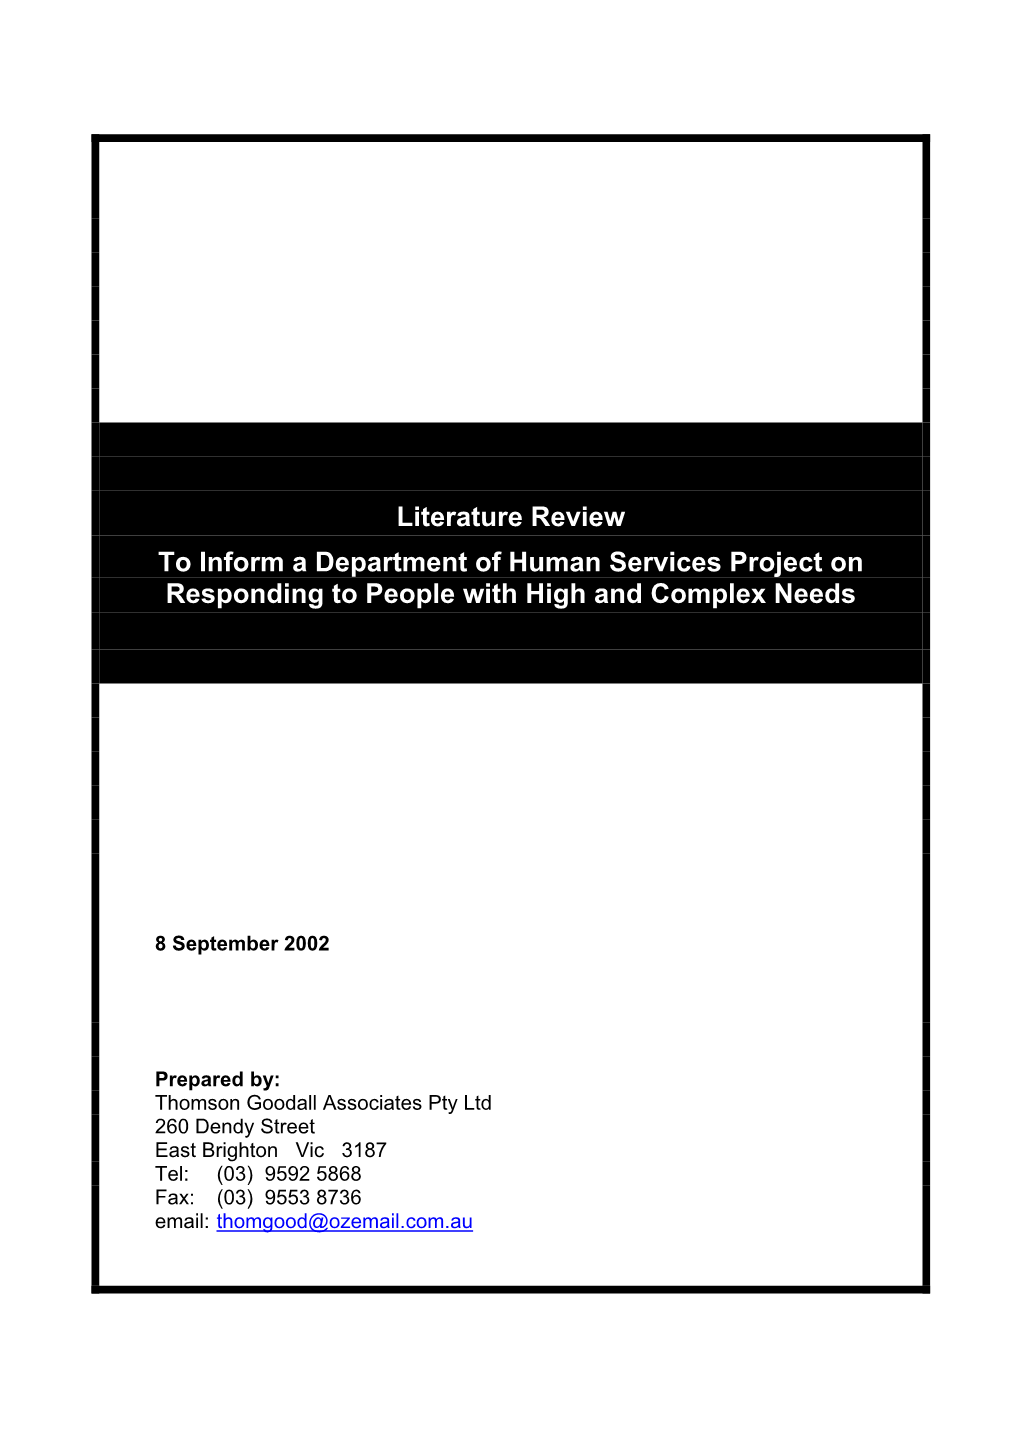 Literature Review to Inform a Department of Human Services Project on Responding to People with High and Complex Needs